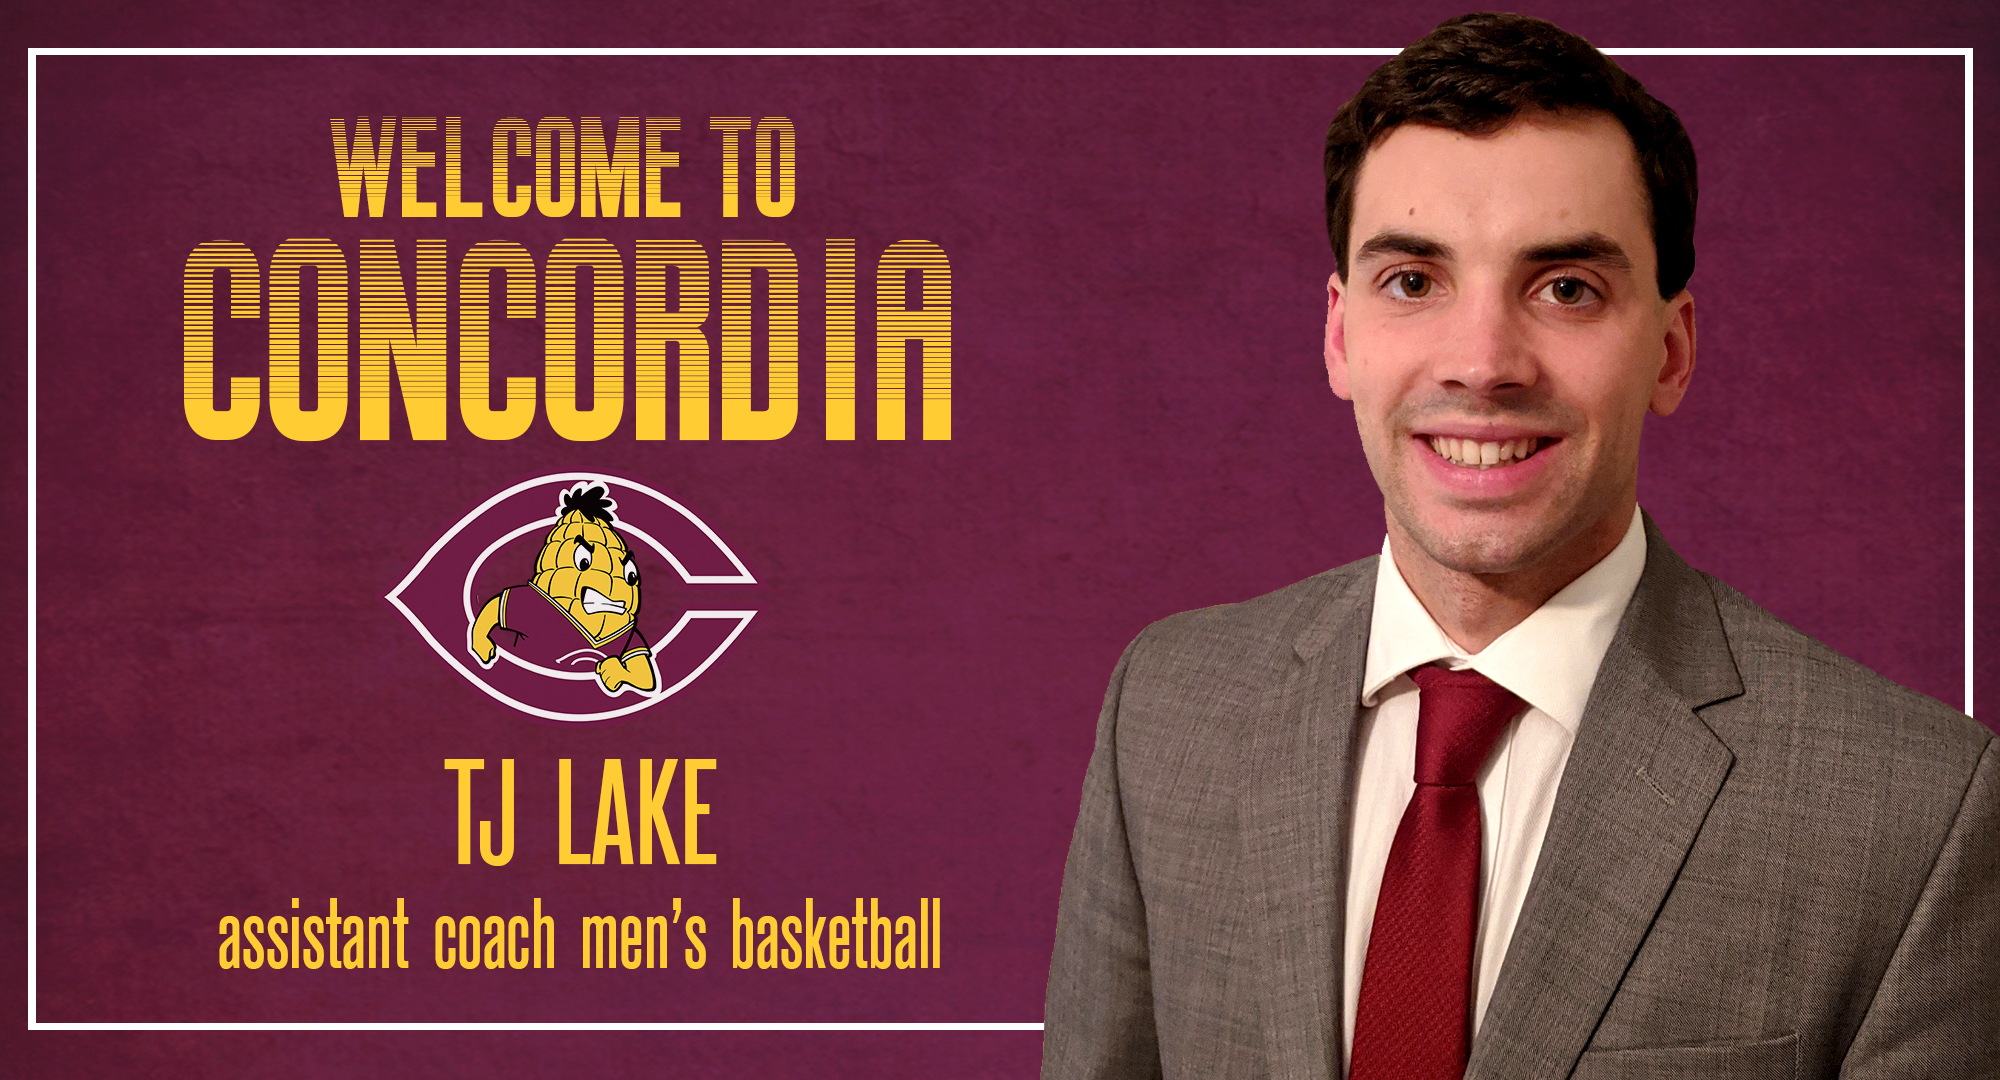 TJ Lake was hired as the full-time assistant coach for the Cobber men's basketball program. He led the IIAC in scoring in his senior season at Dubuque.